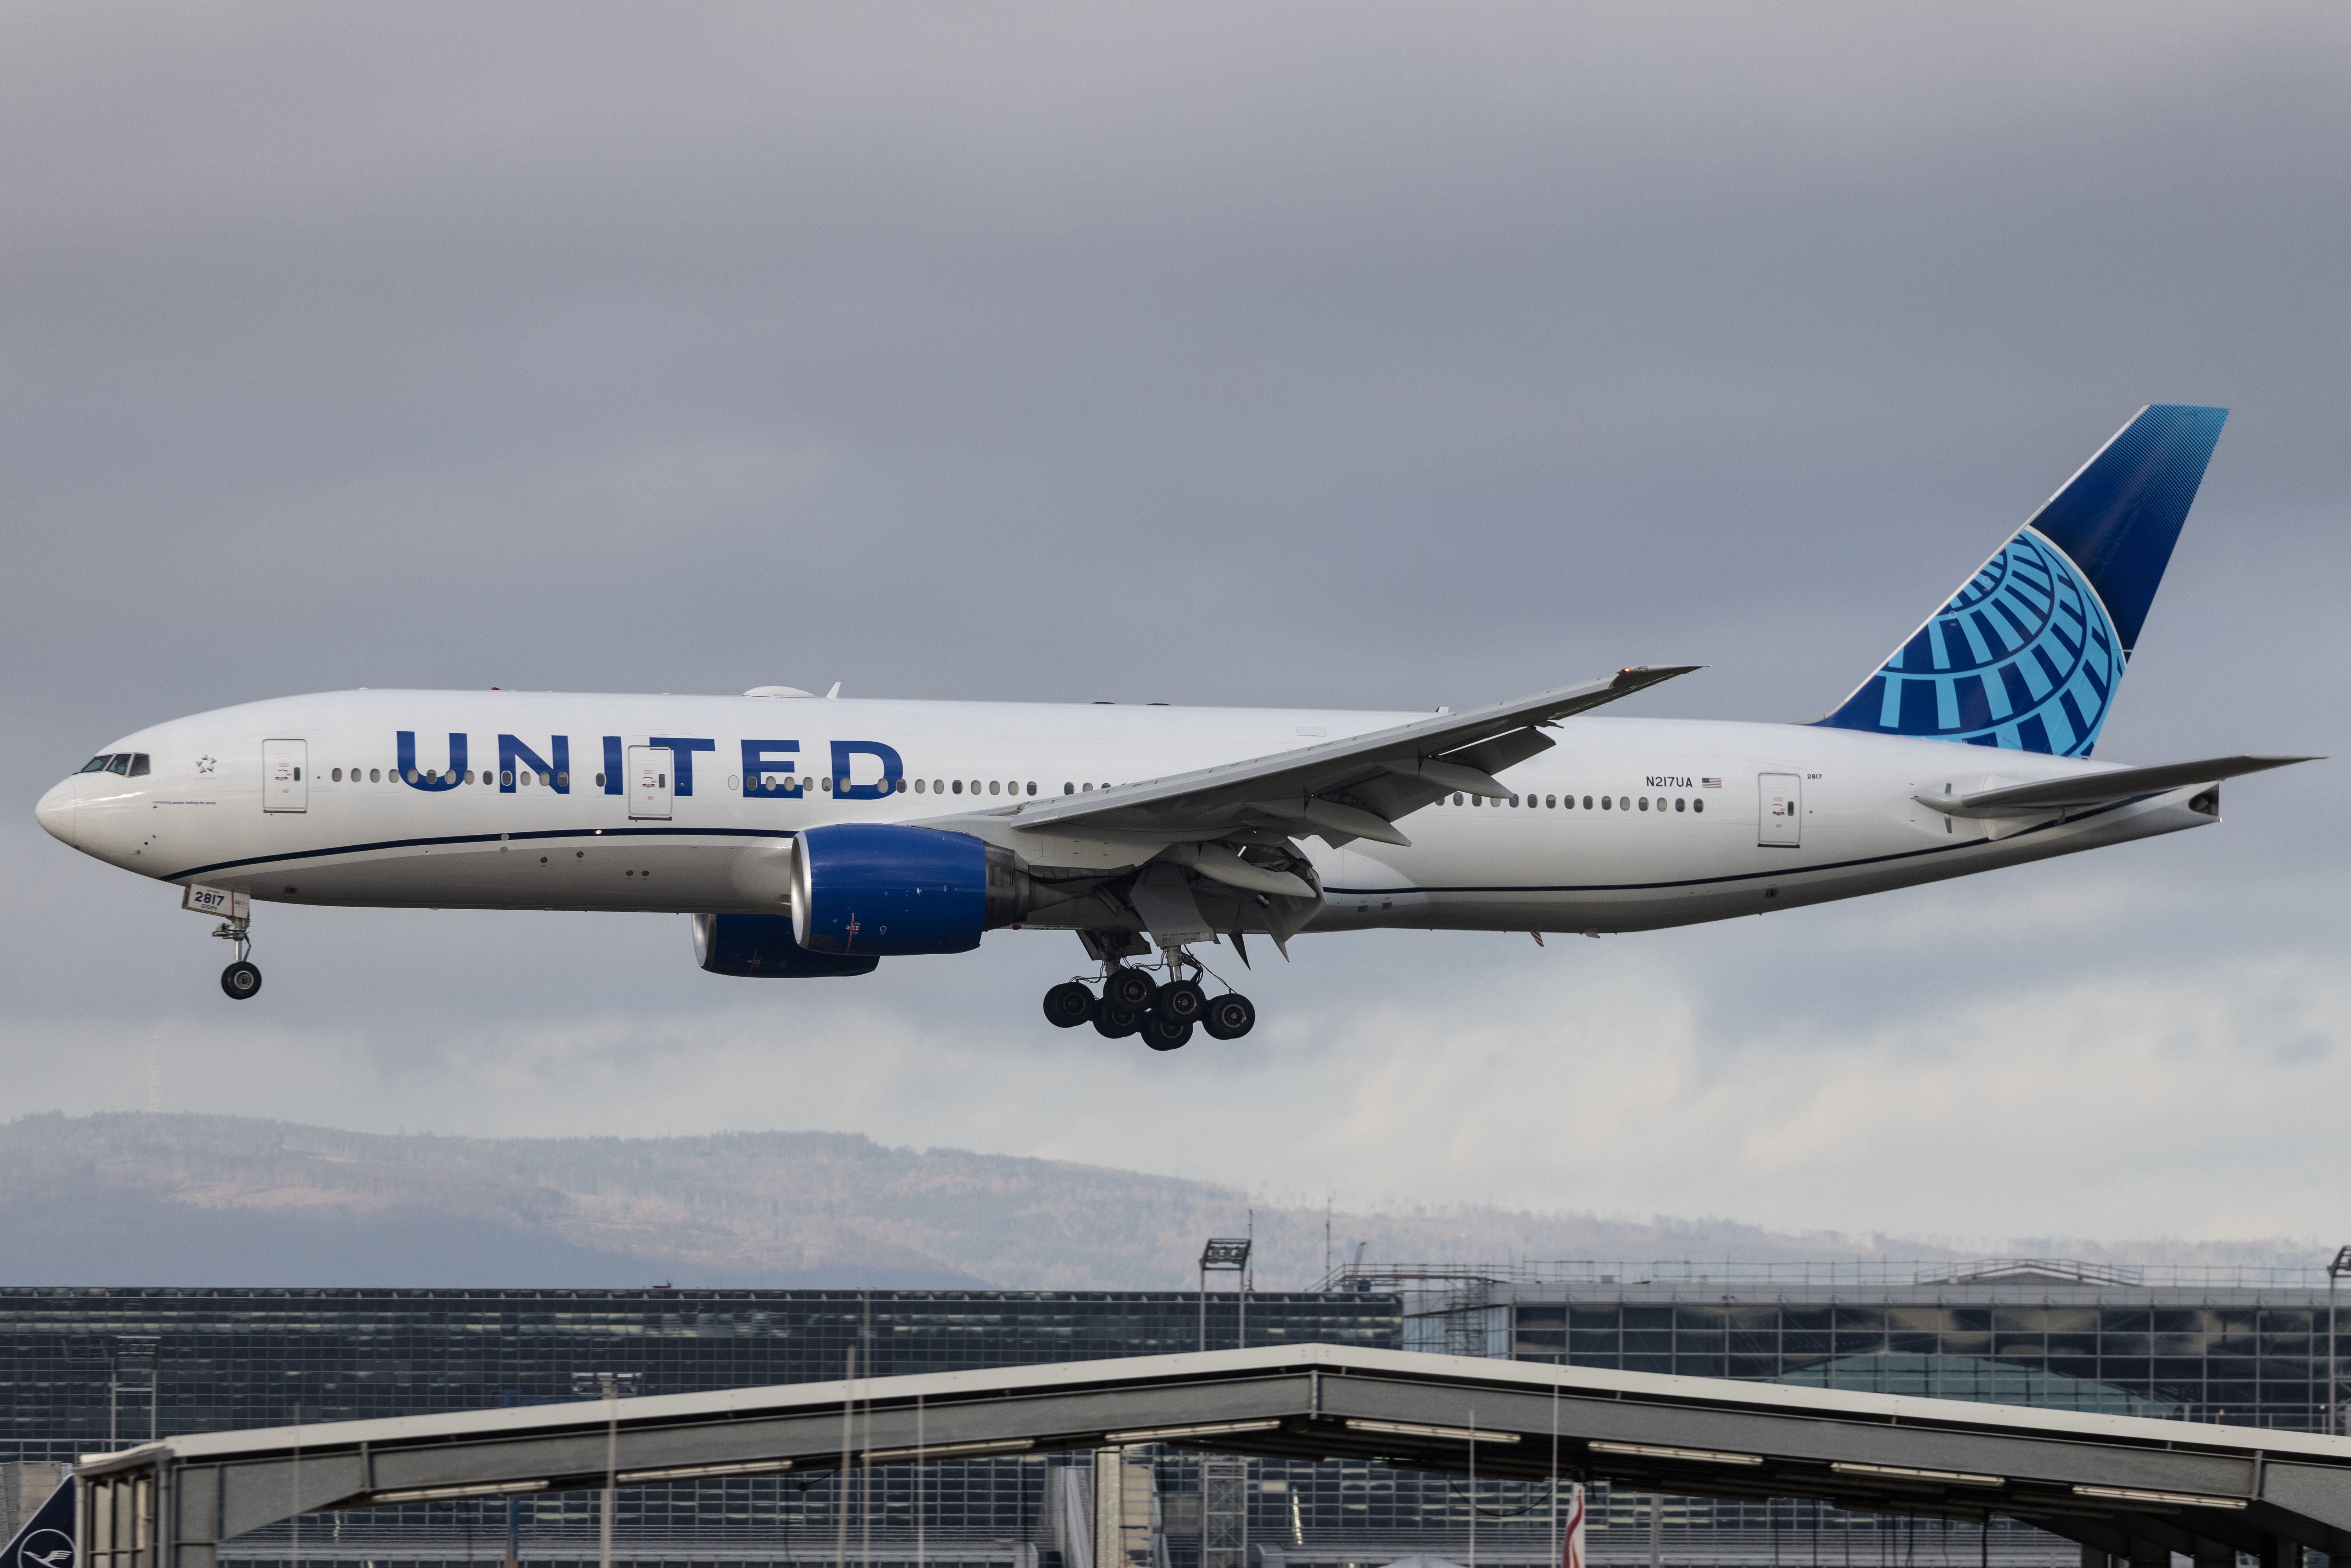 A United Airlines 777-200 just before landing.